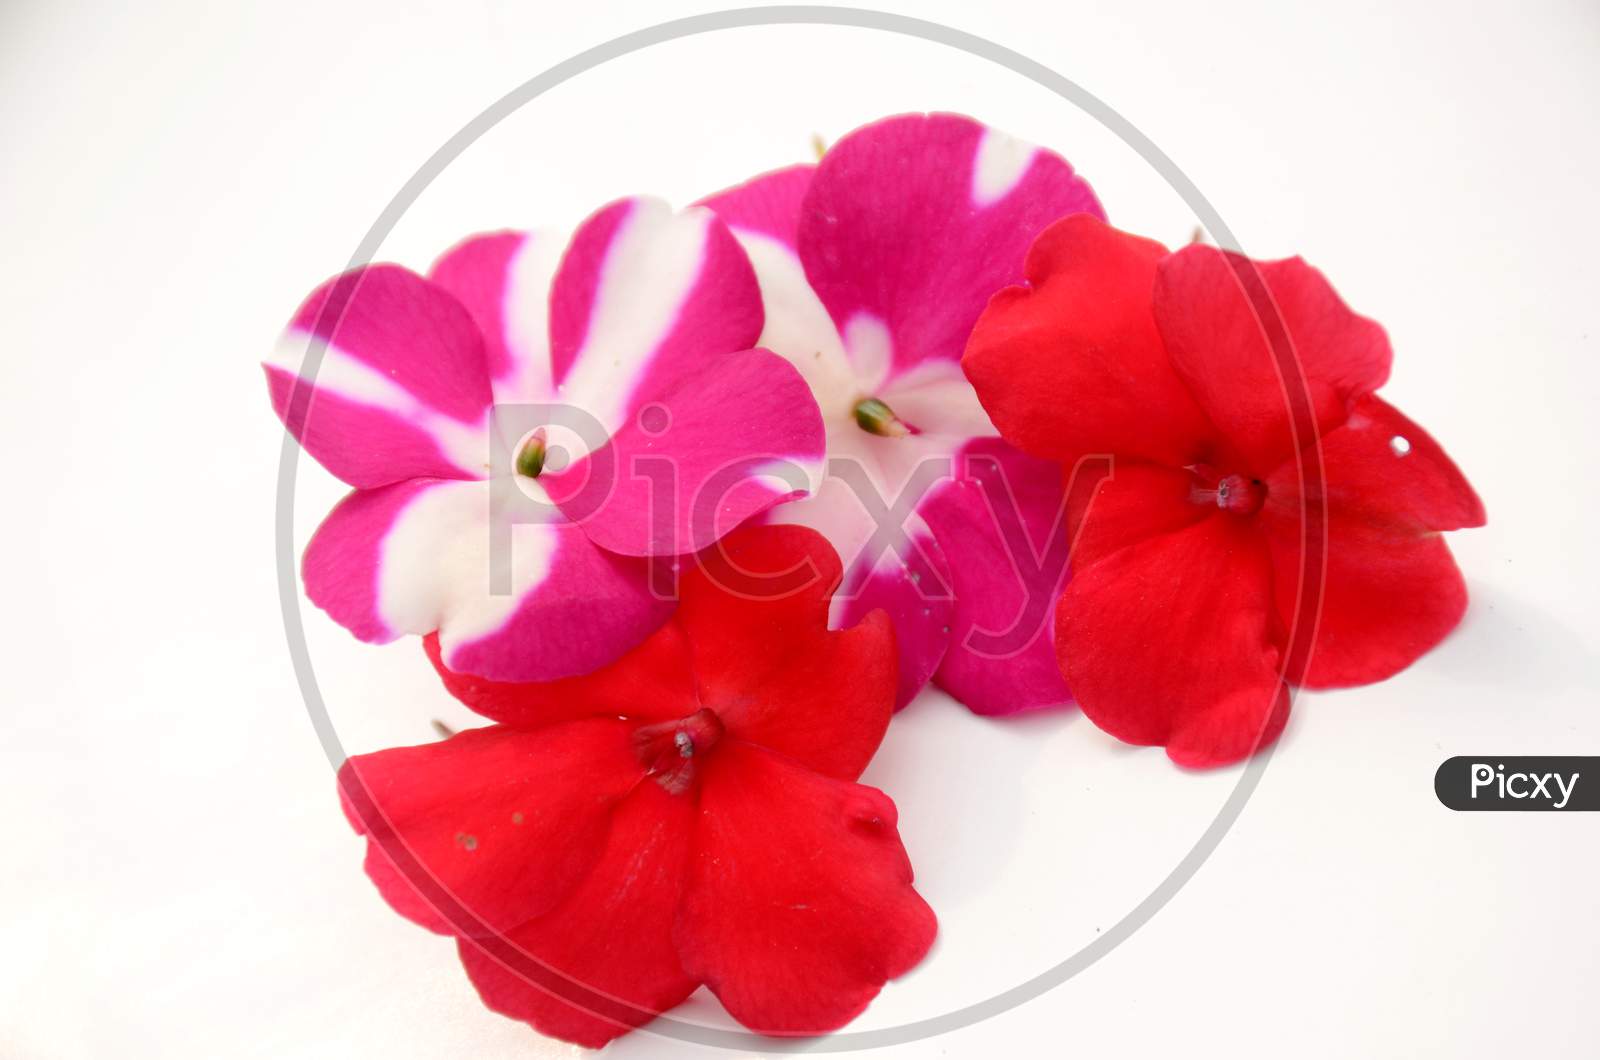 the red white petunia flowers isolated on white background.